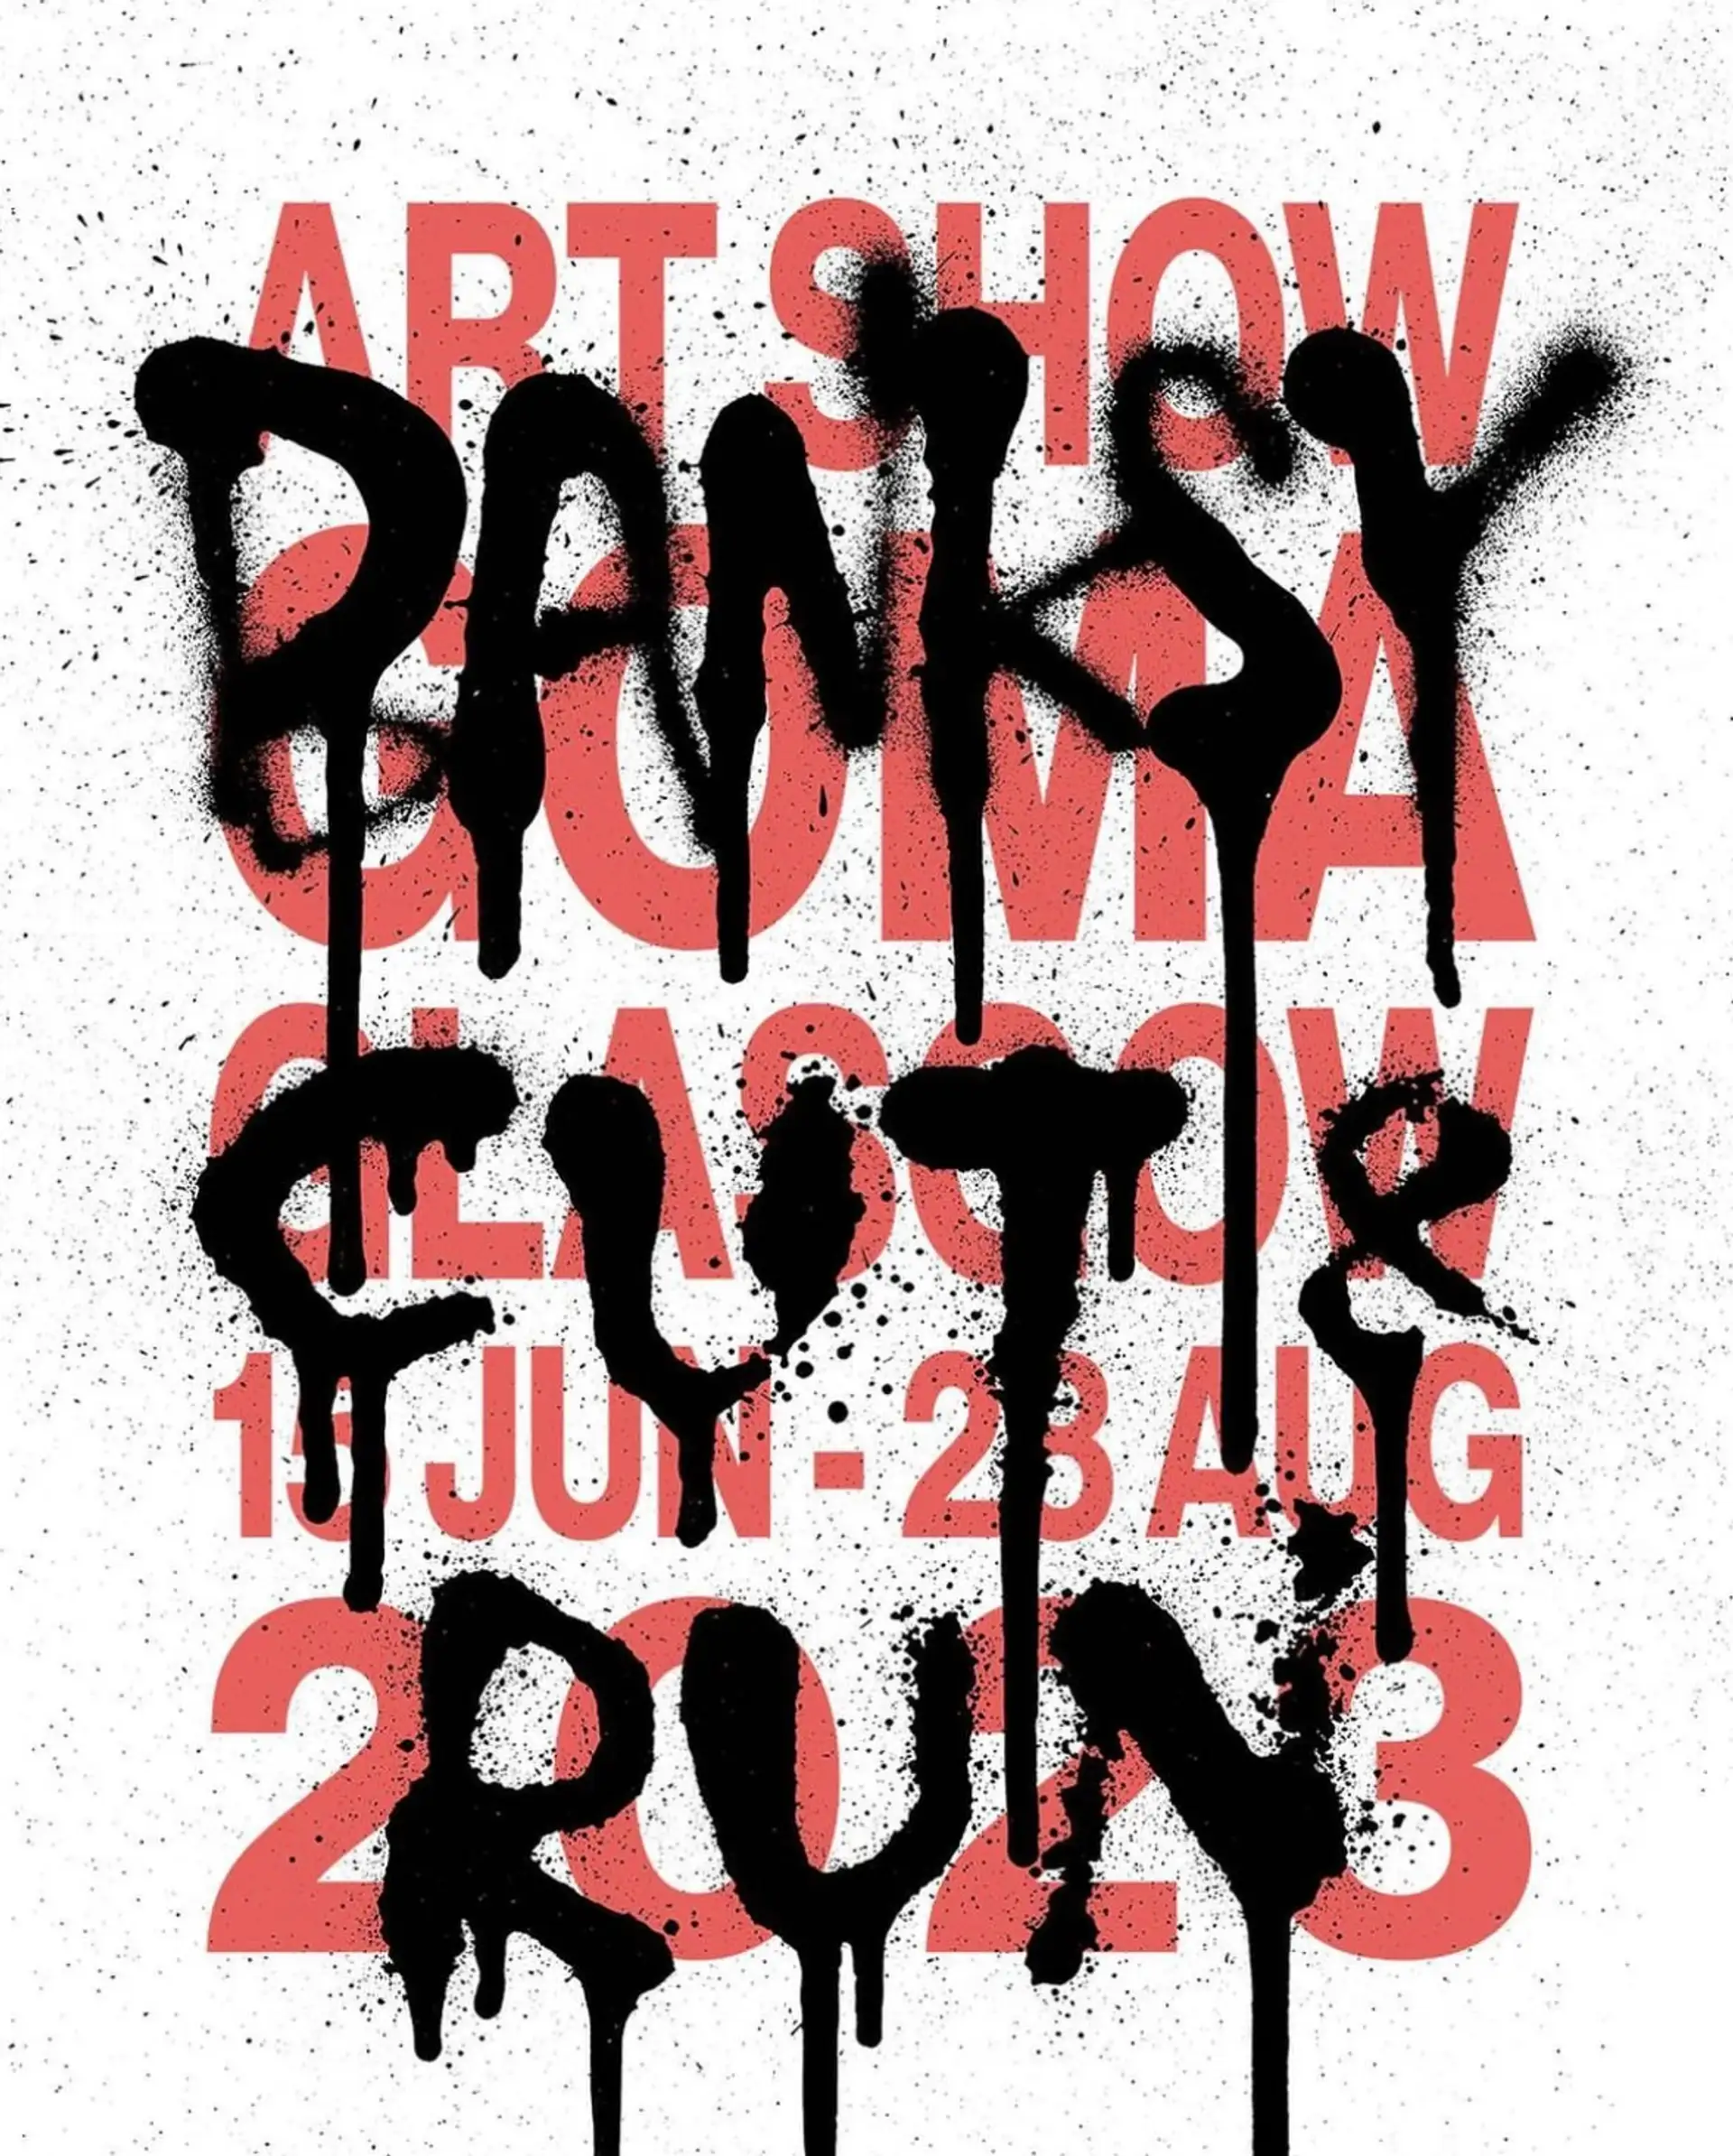 An image of the exhibition poster of Banksy's Cut & Run. It shows red block letters against a white background, announcing the time and place of the show. Over it, and seemingly spray-painted, the artist's name and exhibition title are written.